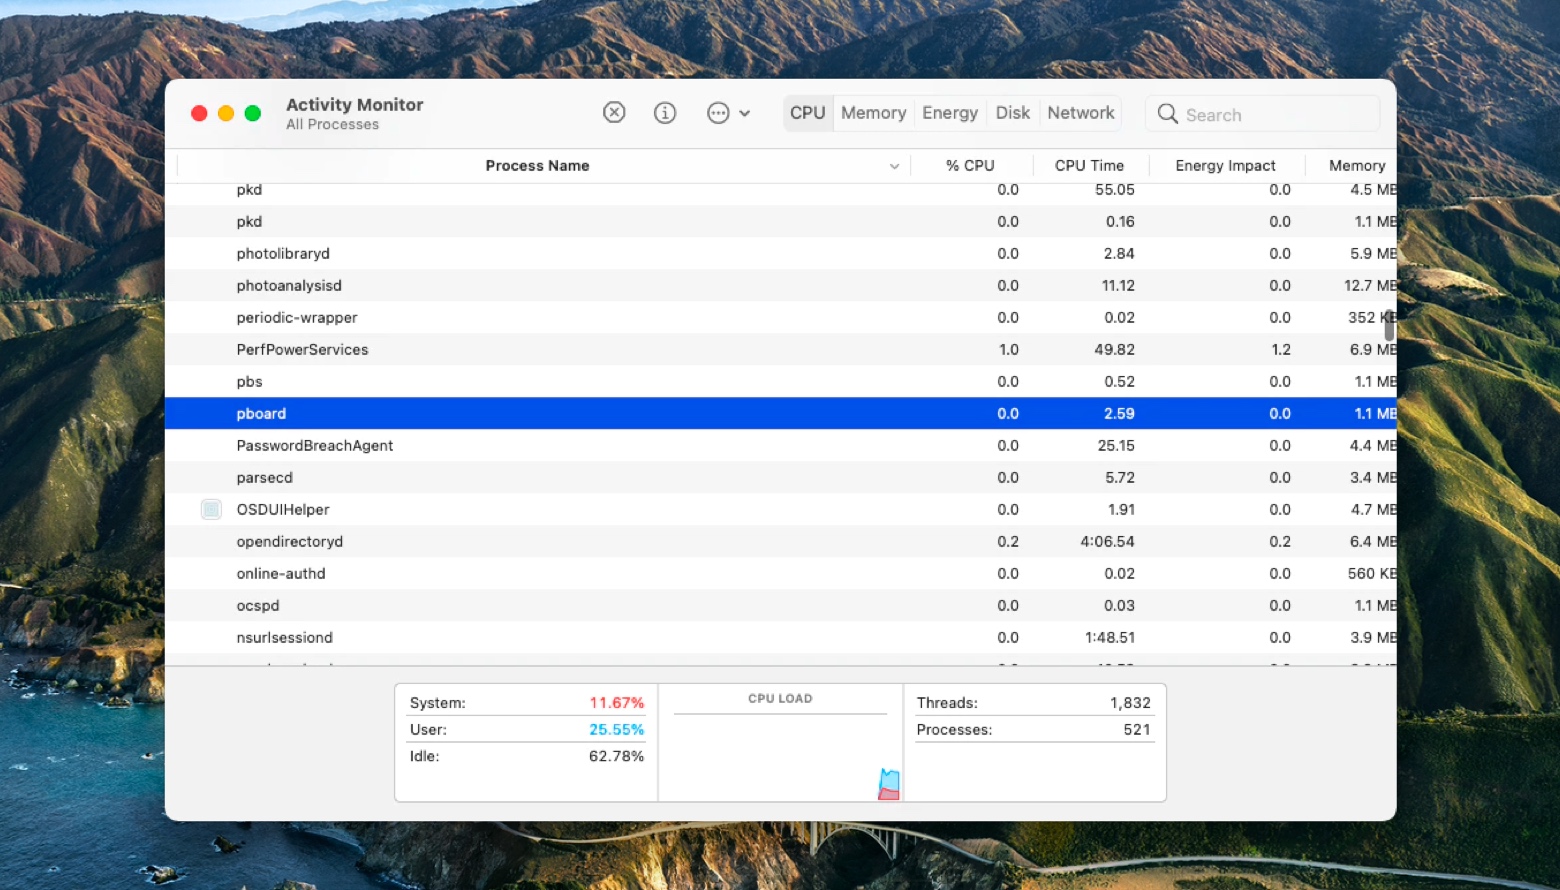 how to view clipboard history on mac